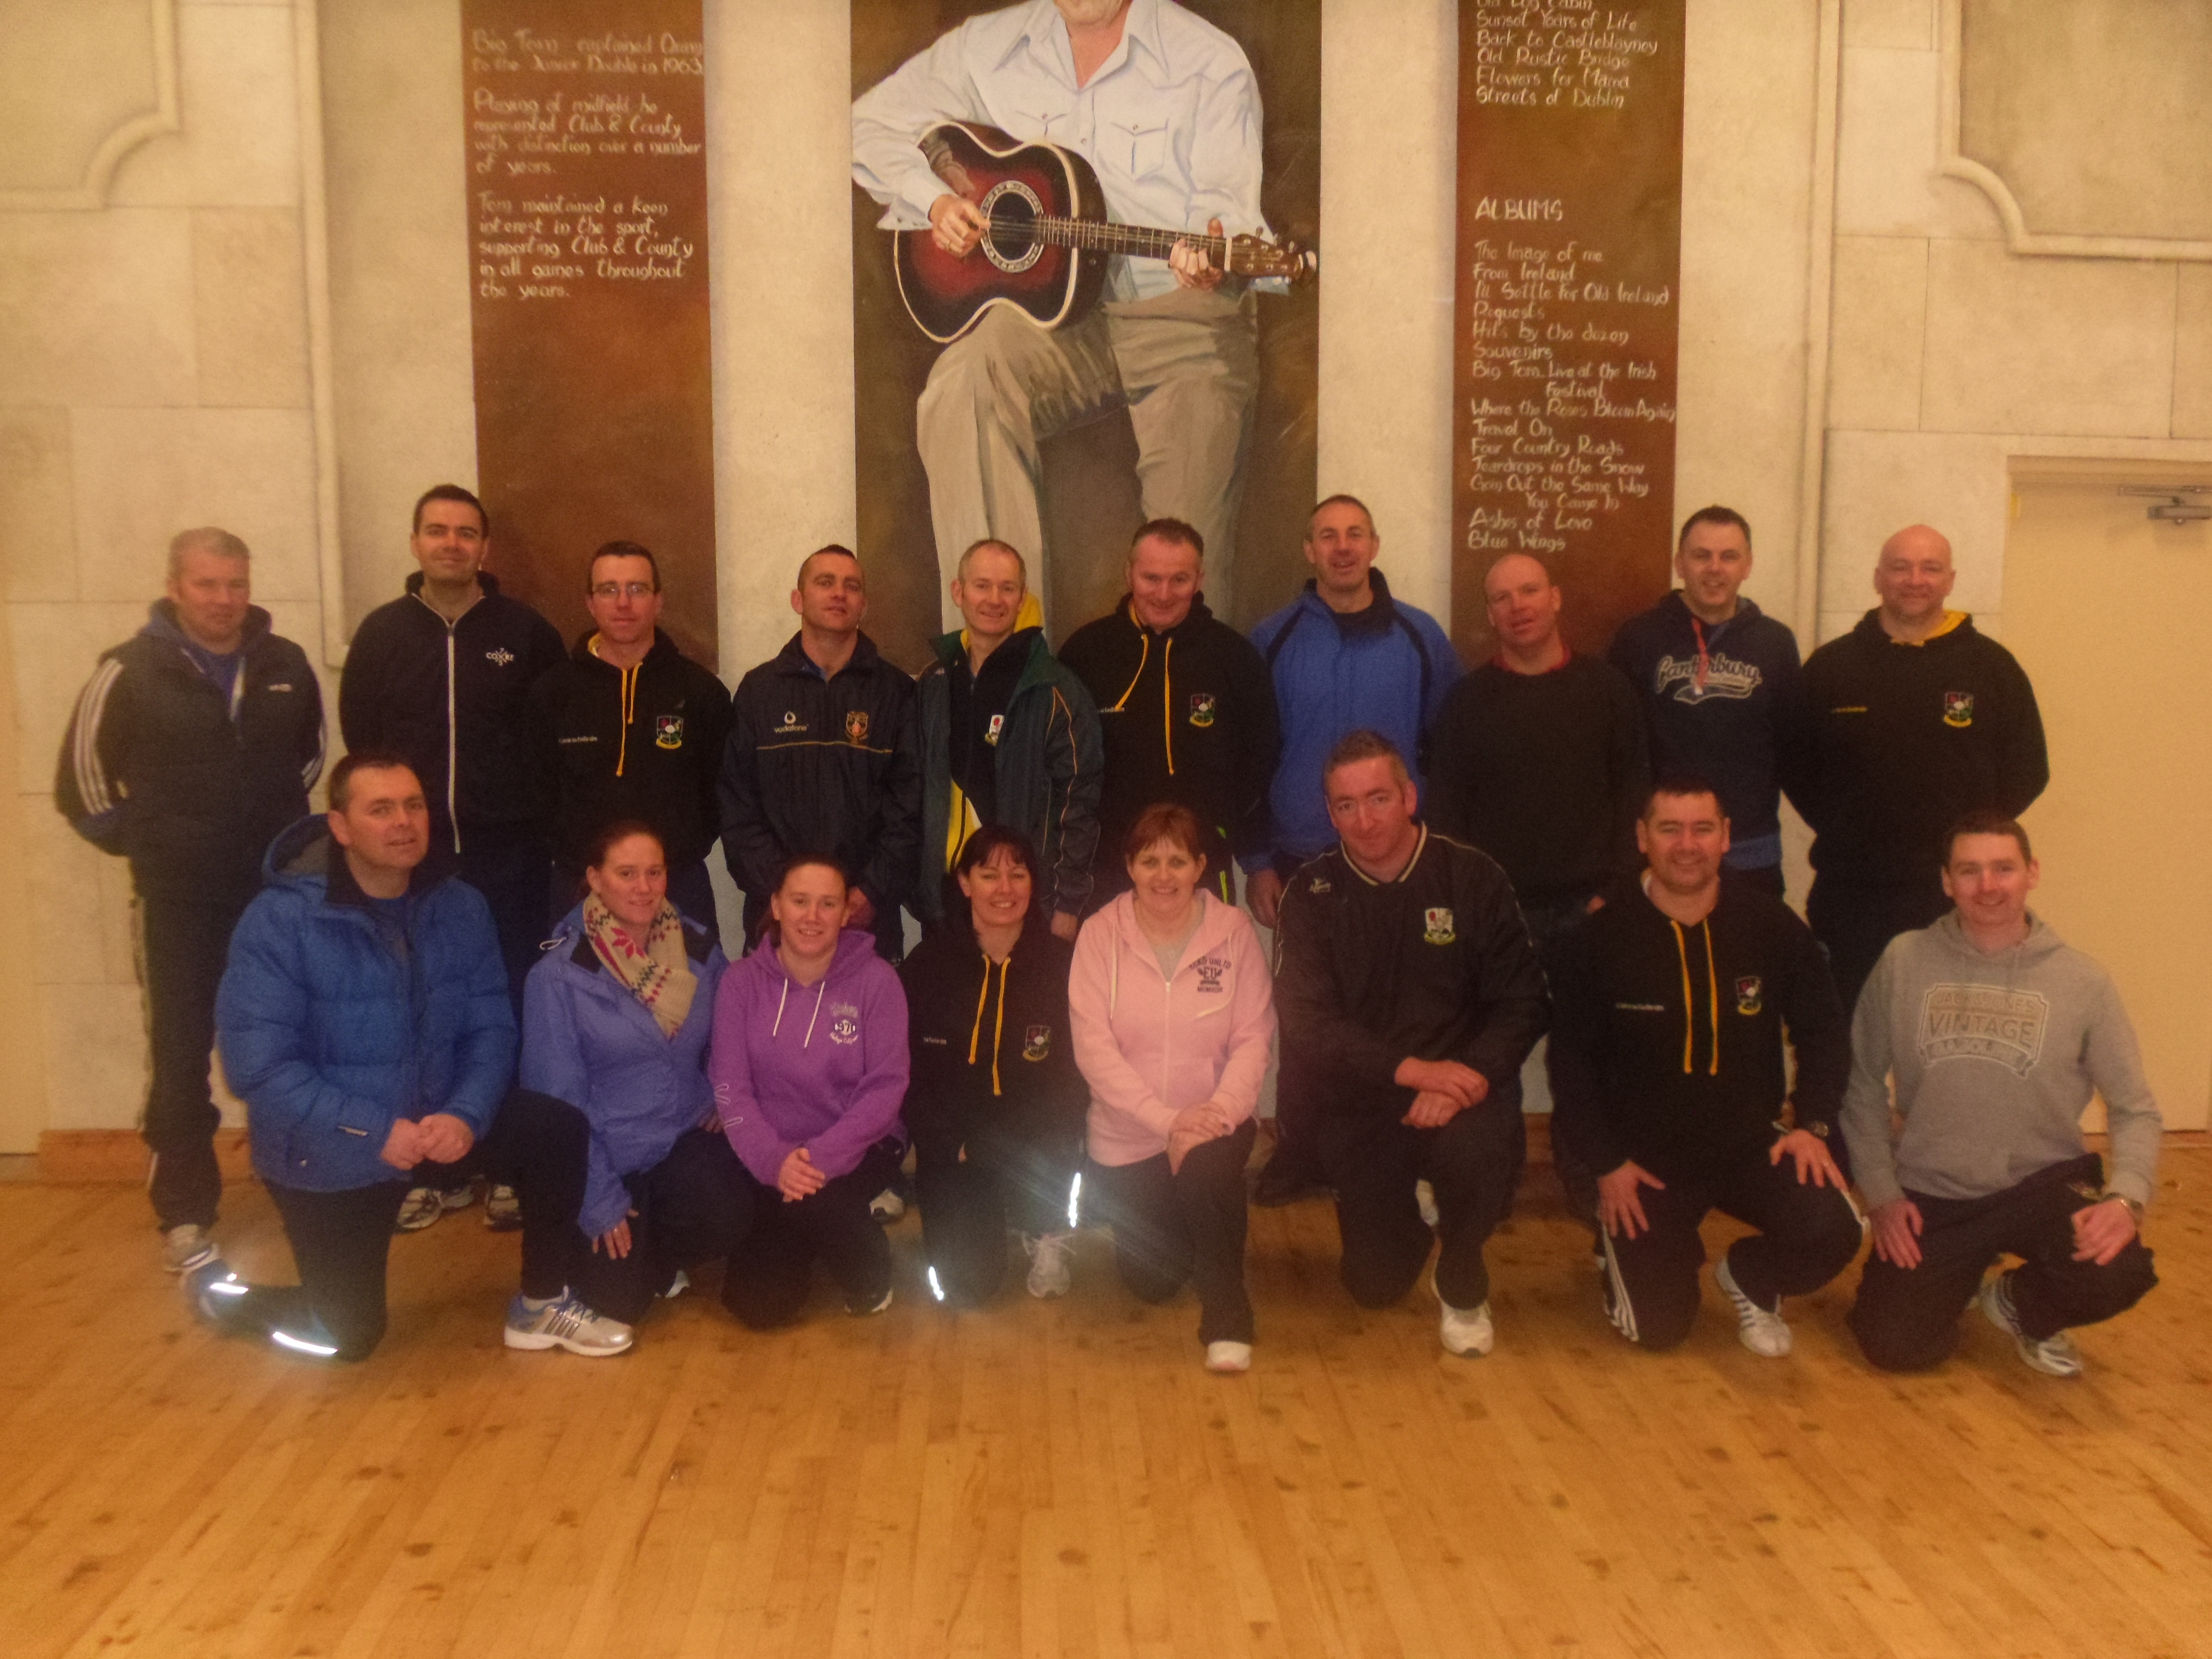 Coaching the Coaches Programme held in Oram by Monaghan Coaching Staff